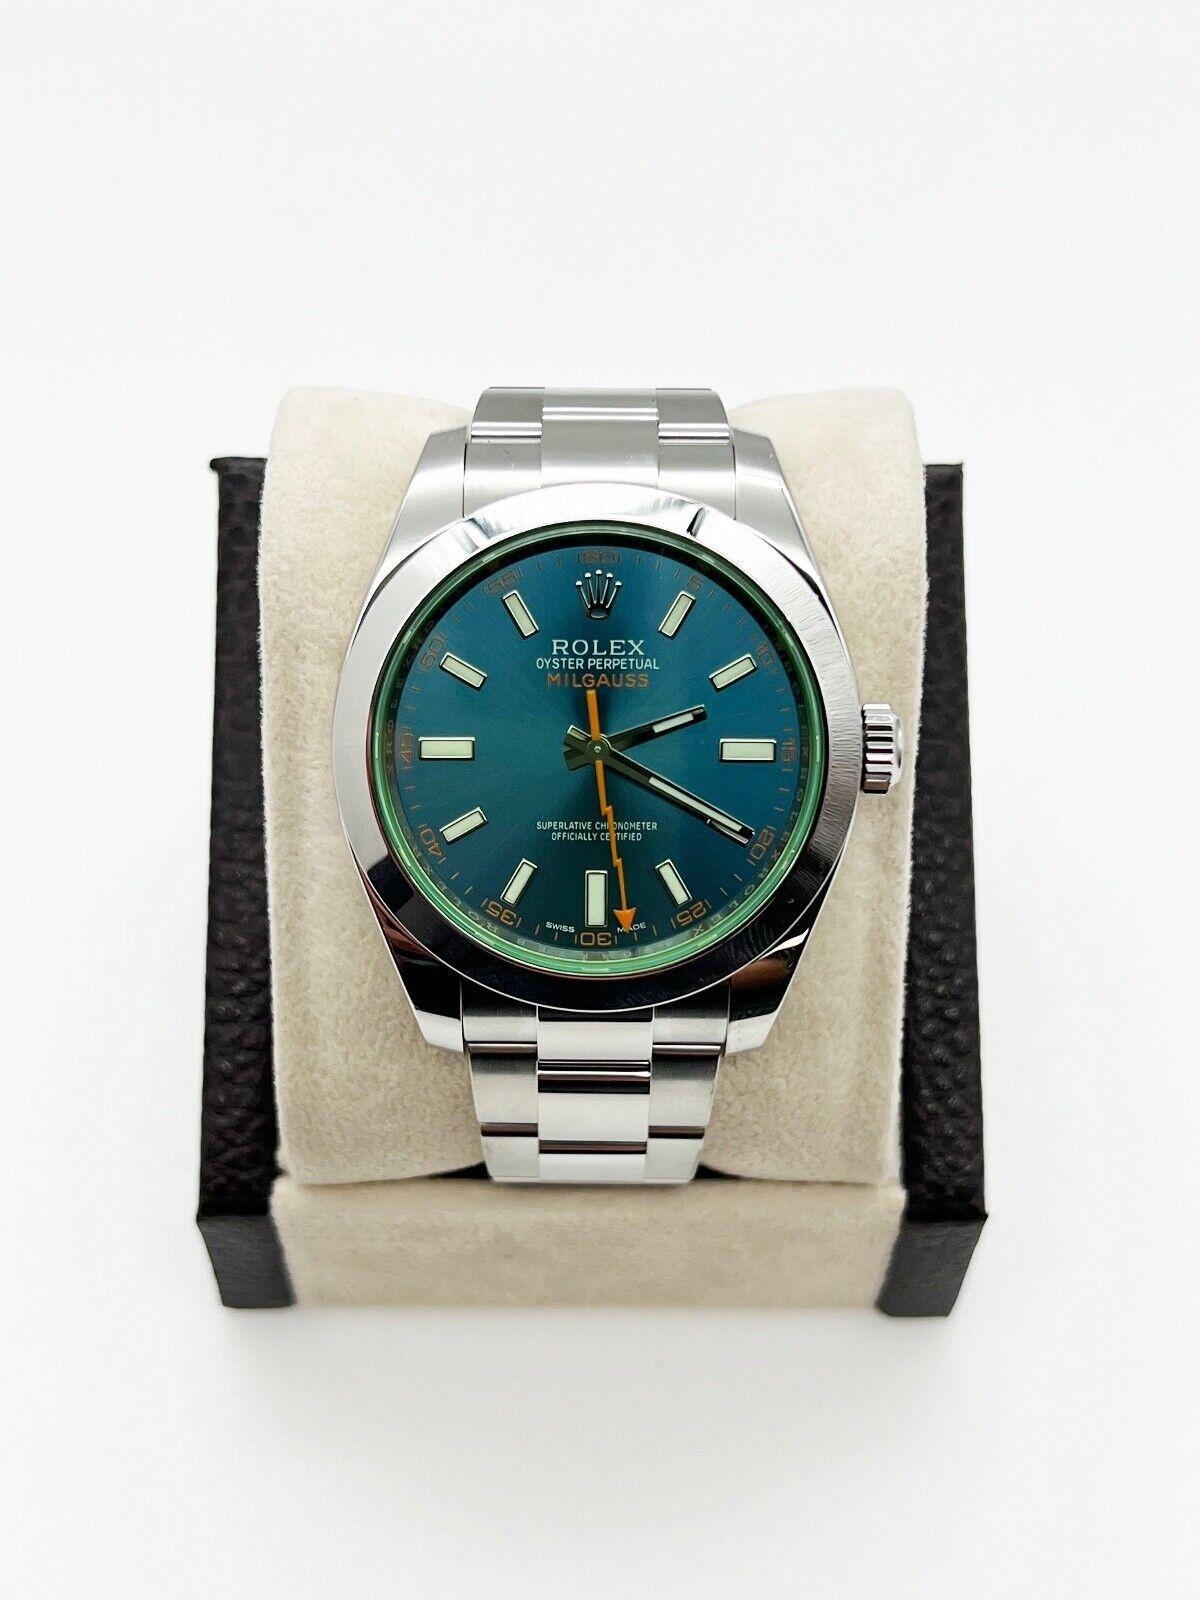 
Style Number: 116400GV



Serial: 4904K***



Year: 2016

 

Model: Milgauss

 

Case Material: Stainless Steel

 

Band: Stainless Steel

  

Bezel: Stainless Steel

  

Dial: Blue

 

Face: Green Sapphire Crystal

 

Case Size: 40mm

 

Includes: